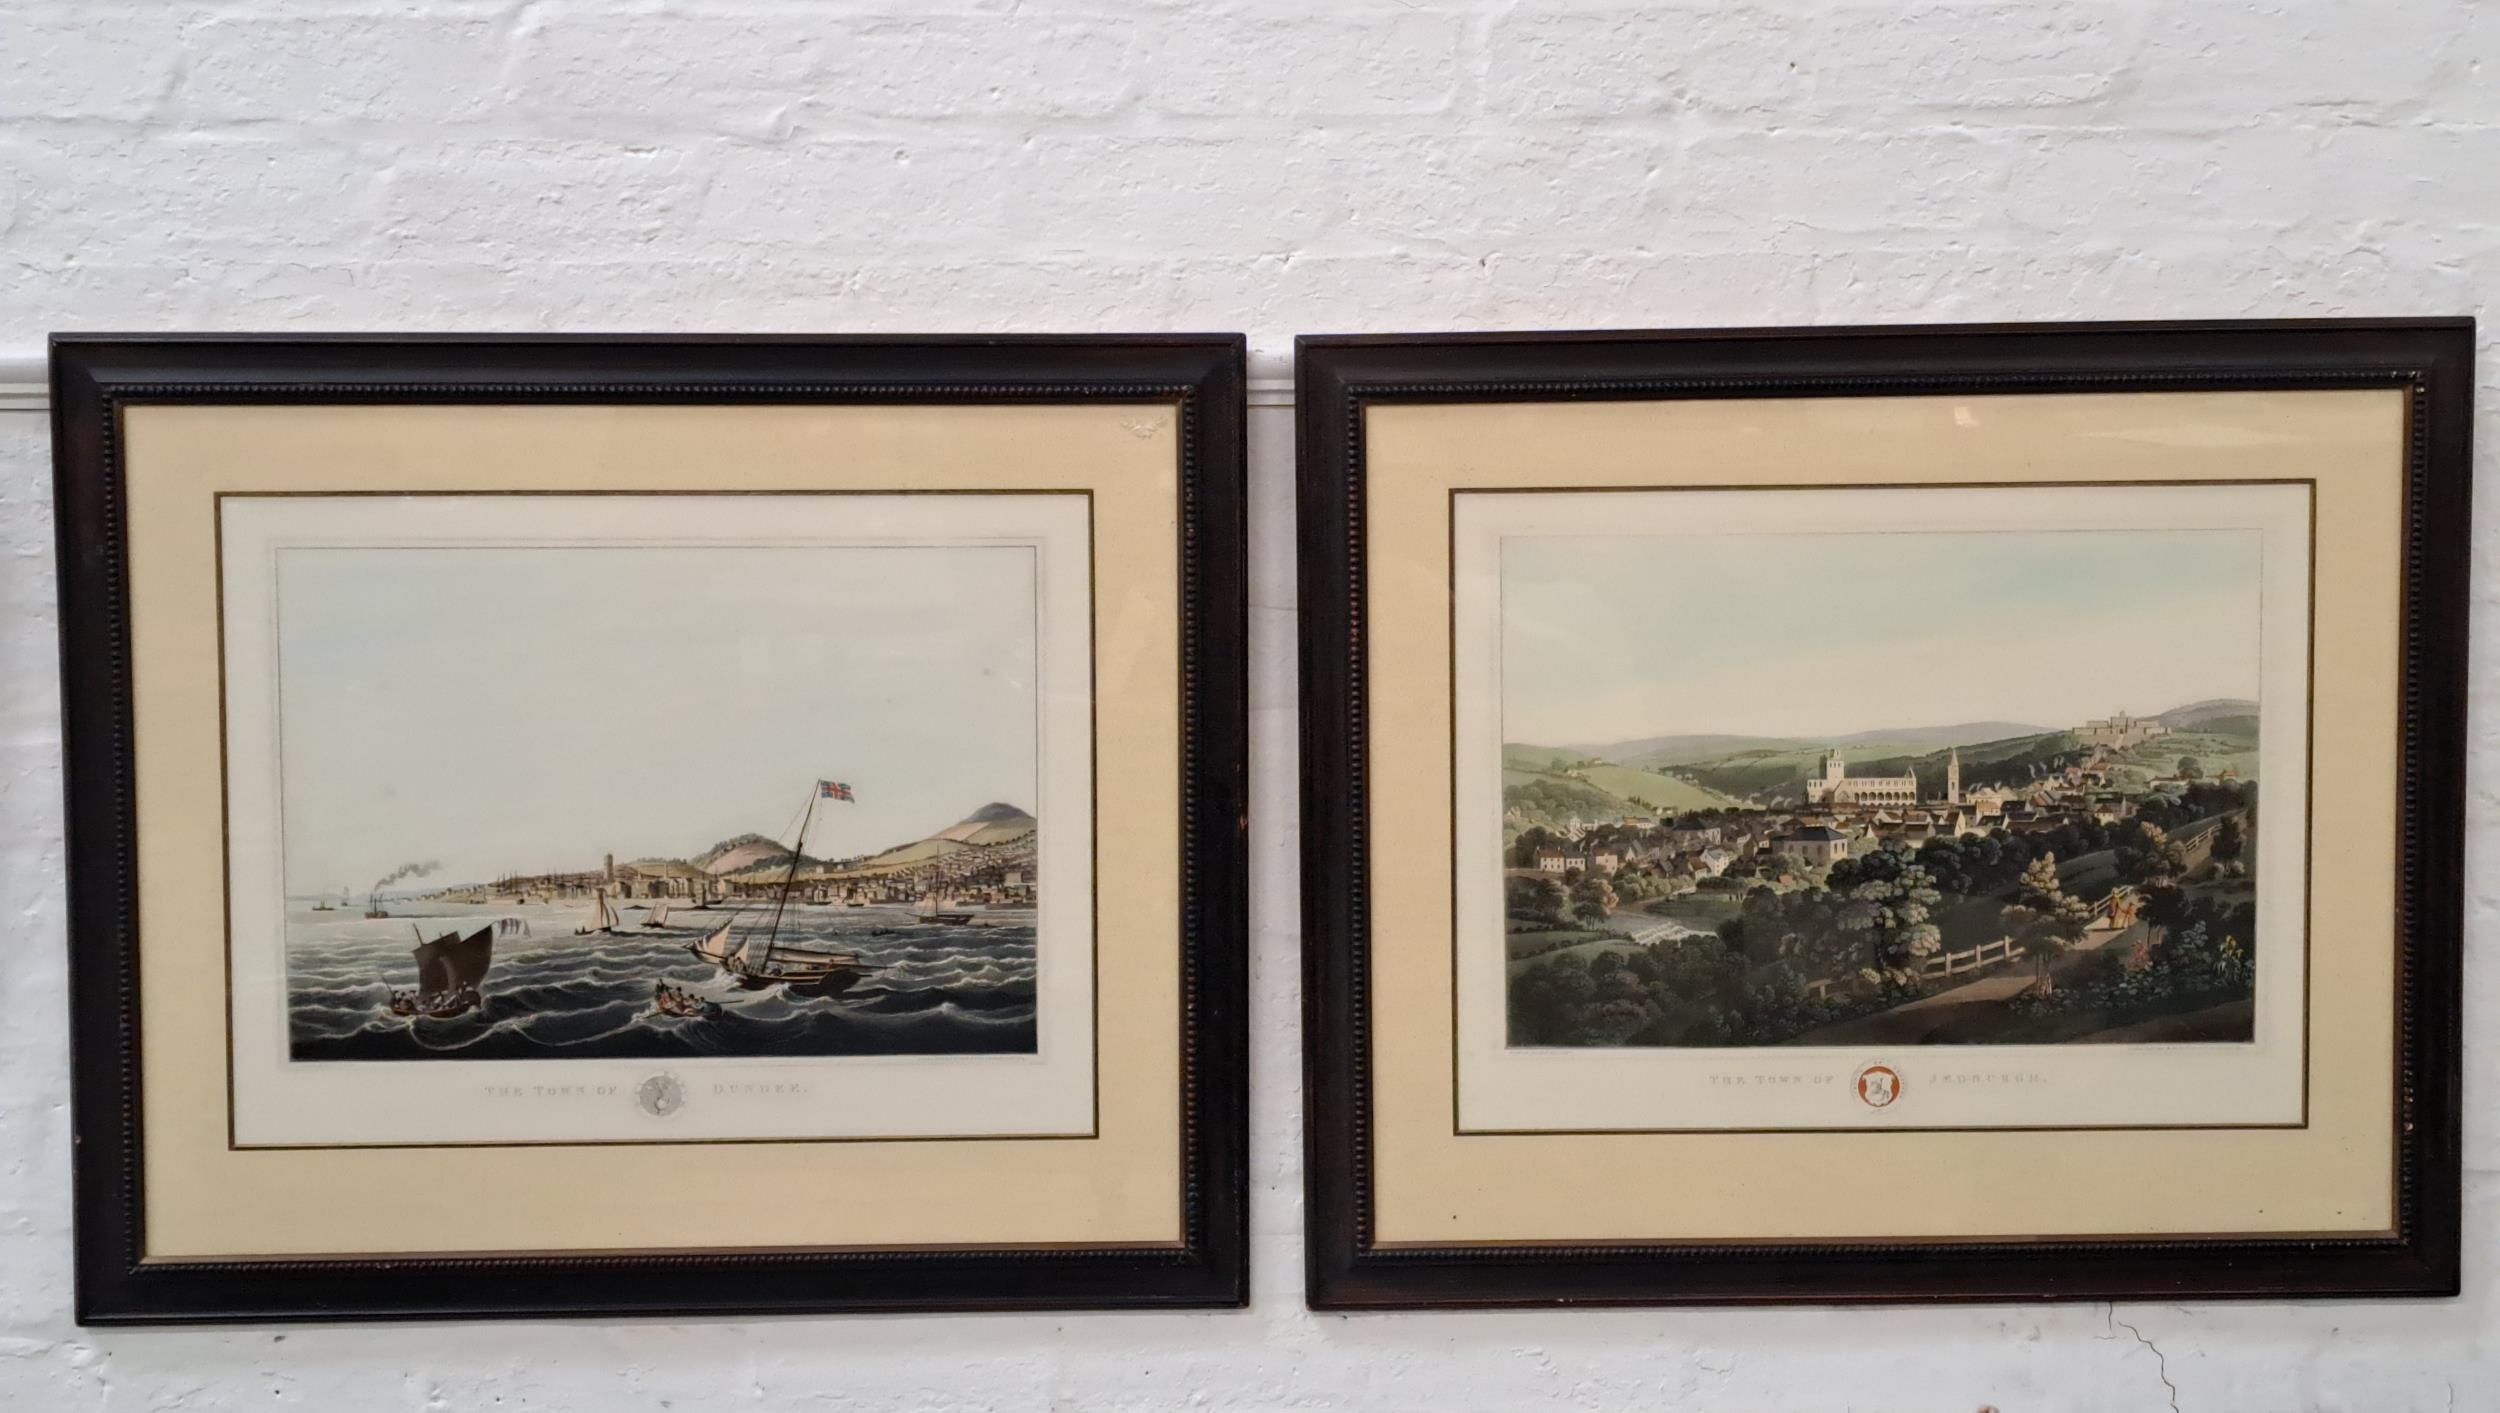 PAIR OF SCOTTISH PRINTS The Town Of Dundee and The Town Of Jedburgh, 55.5cm x 38cm and 56cm x 38.5cm